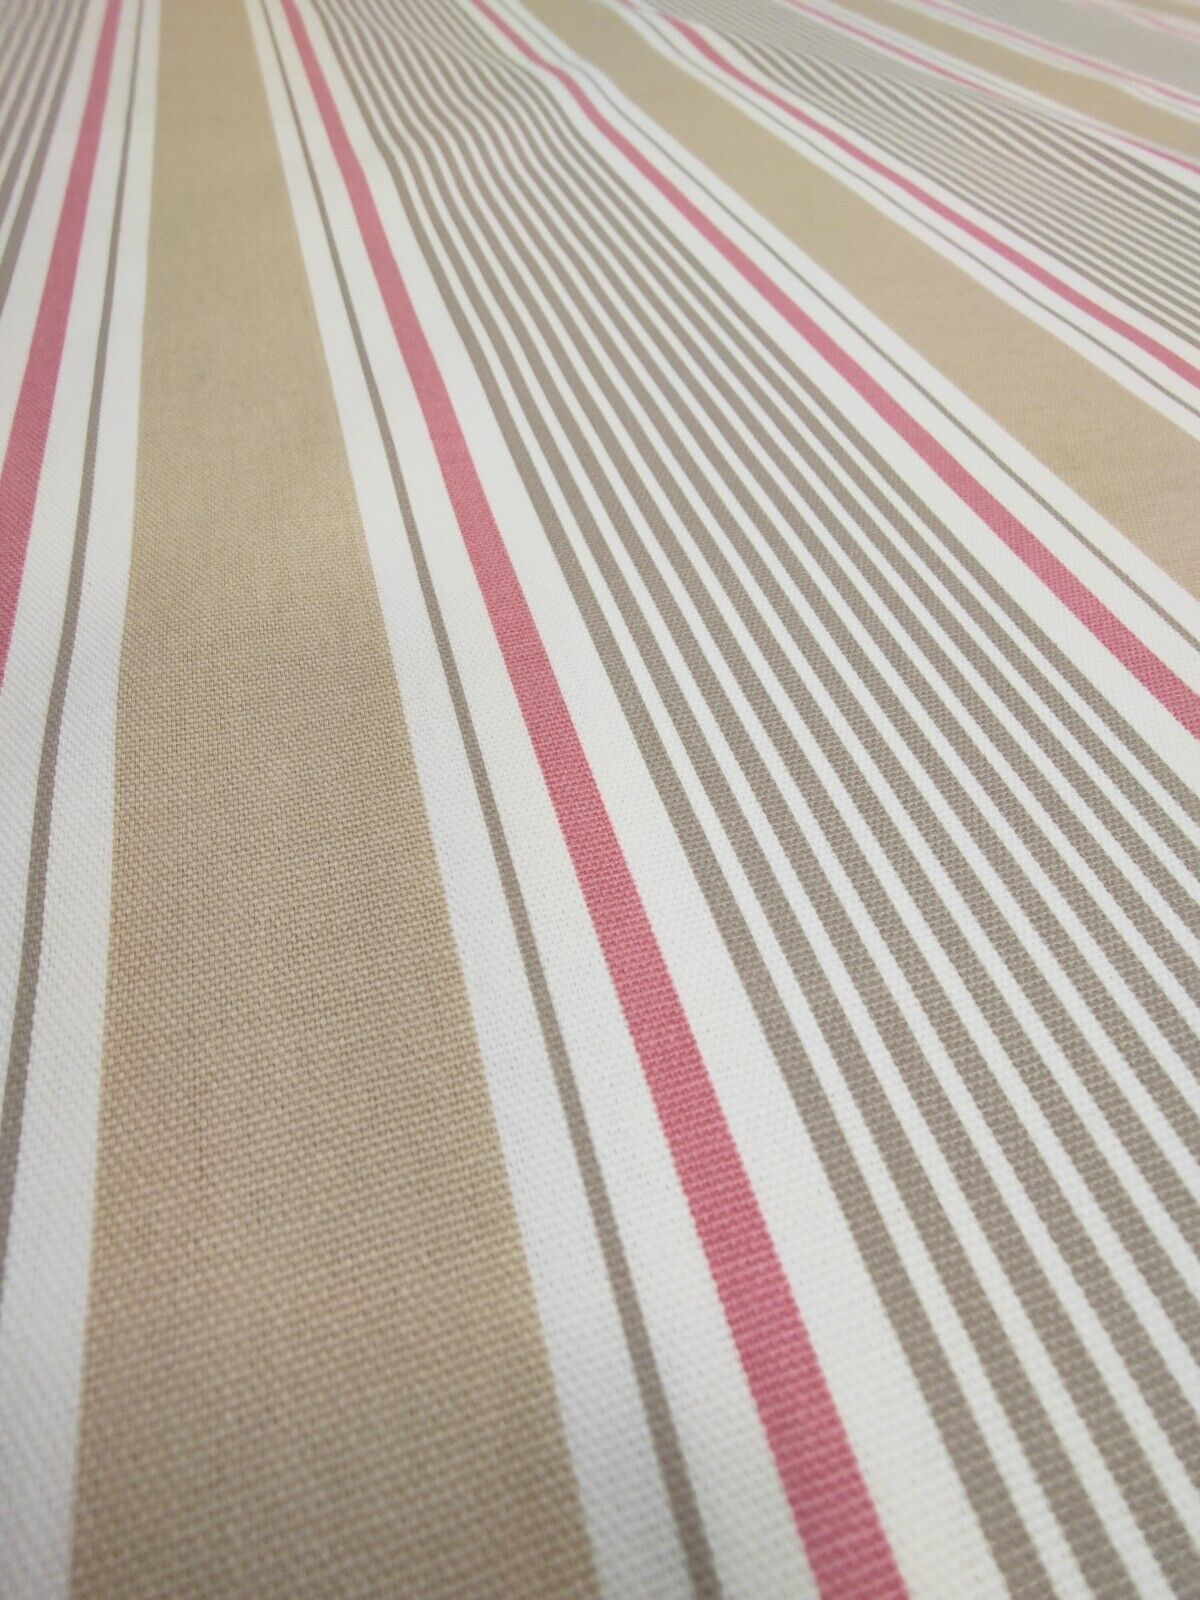 Studio G Sail Stripe Sand Curtain Upholstery Fabric By The Metre